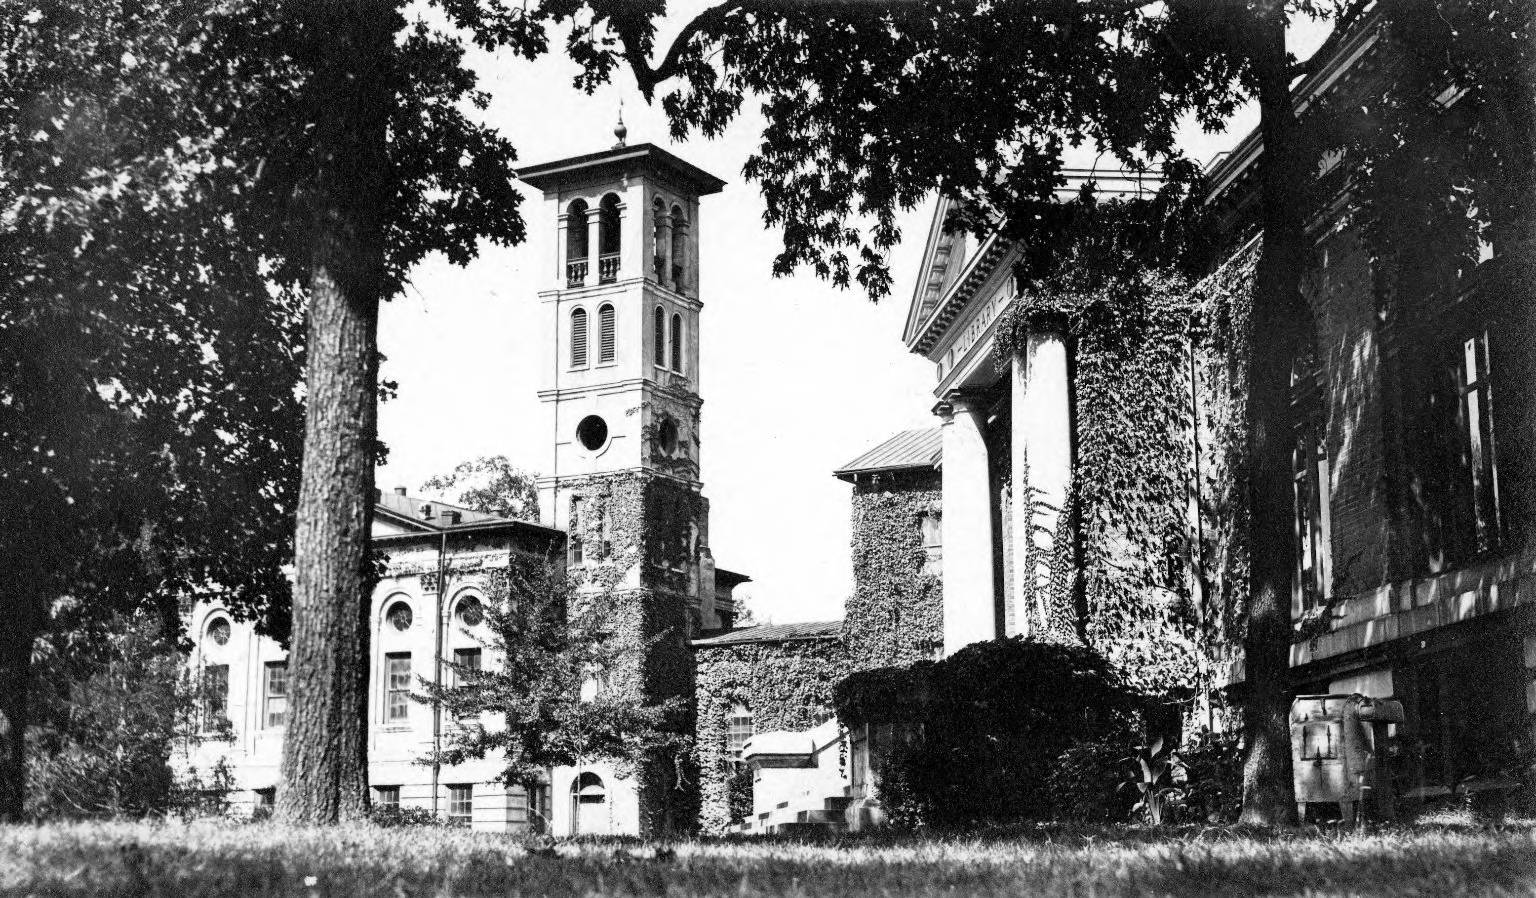 Furman bell tower in black and white, from old campus